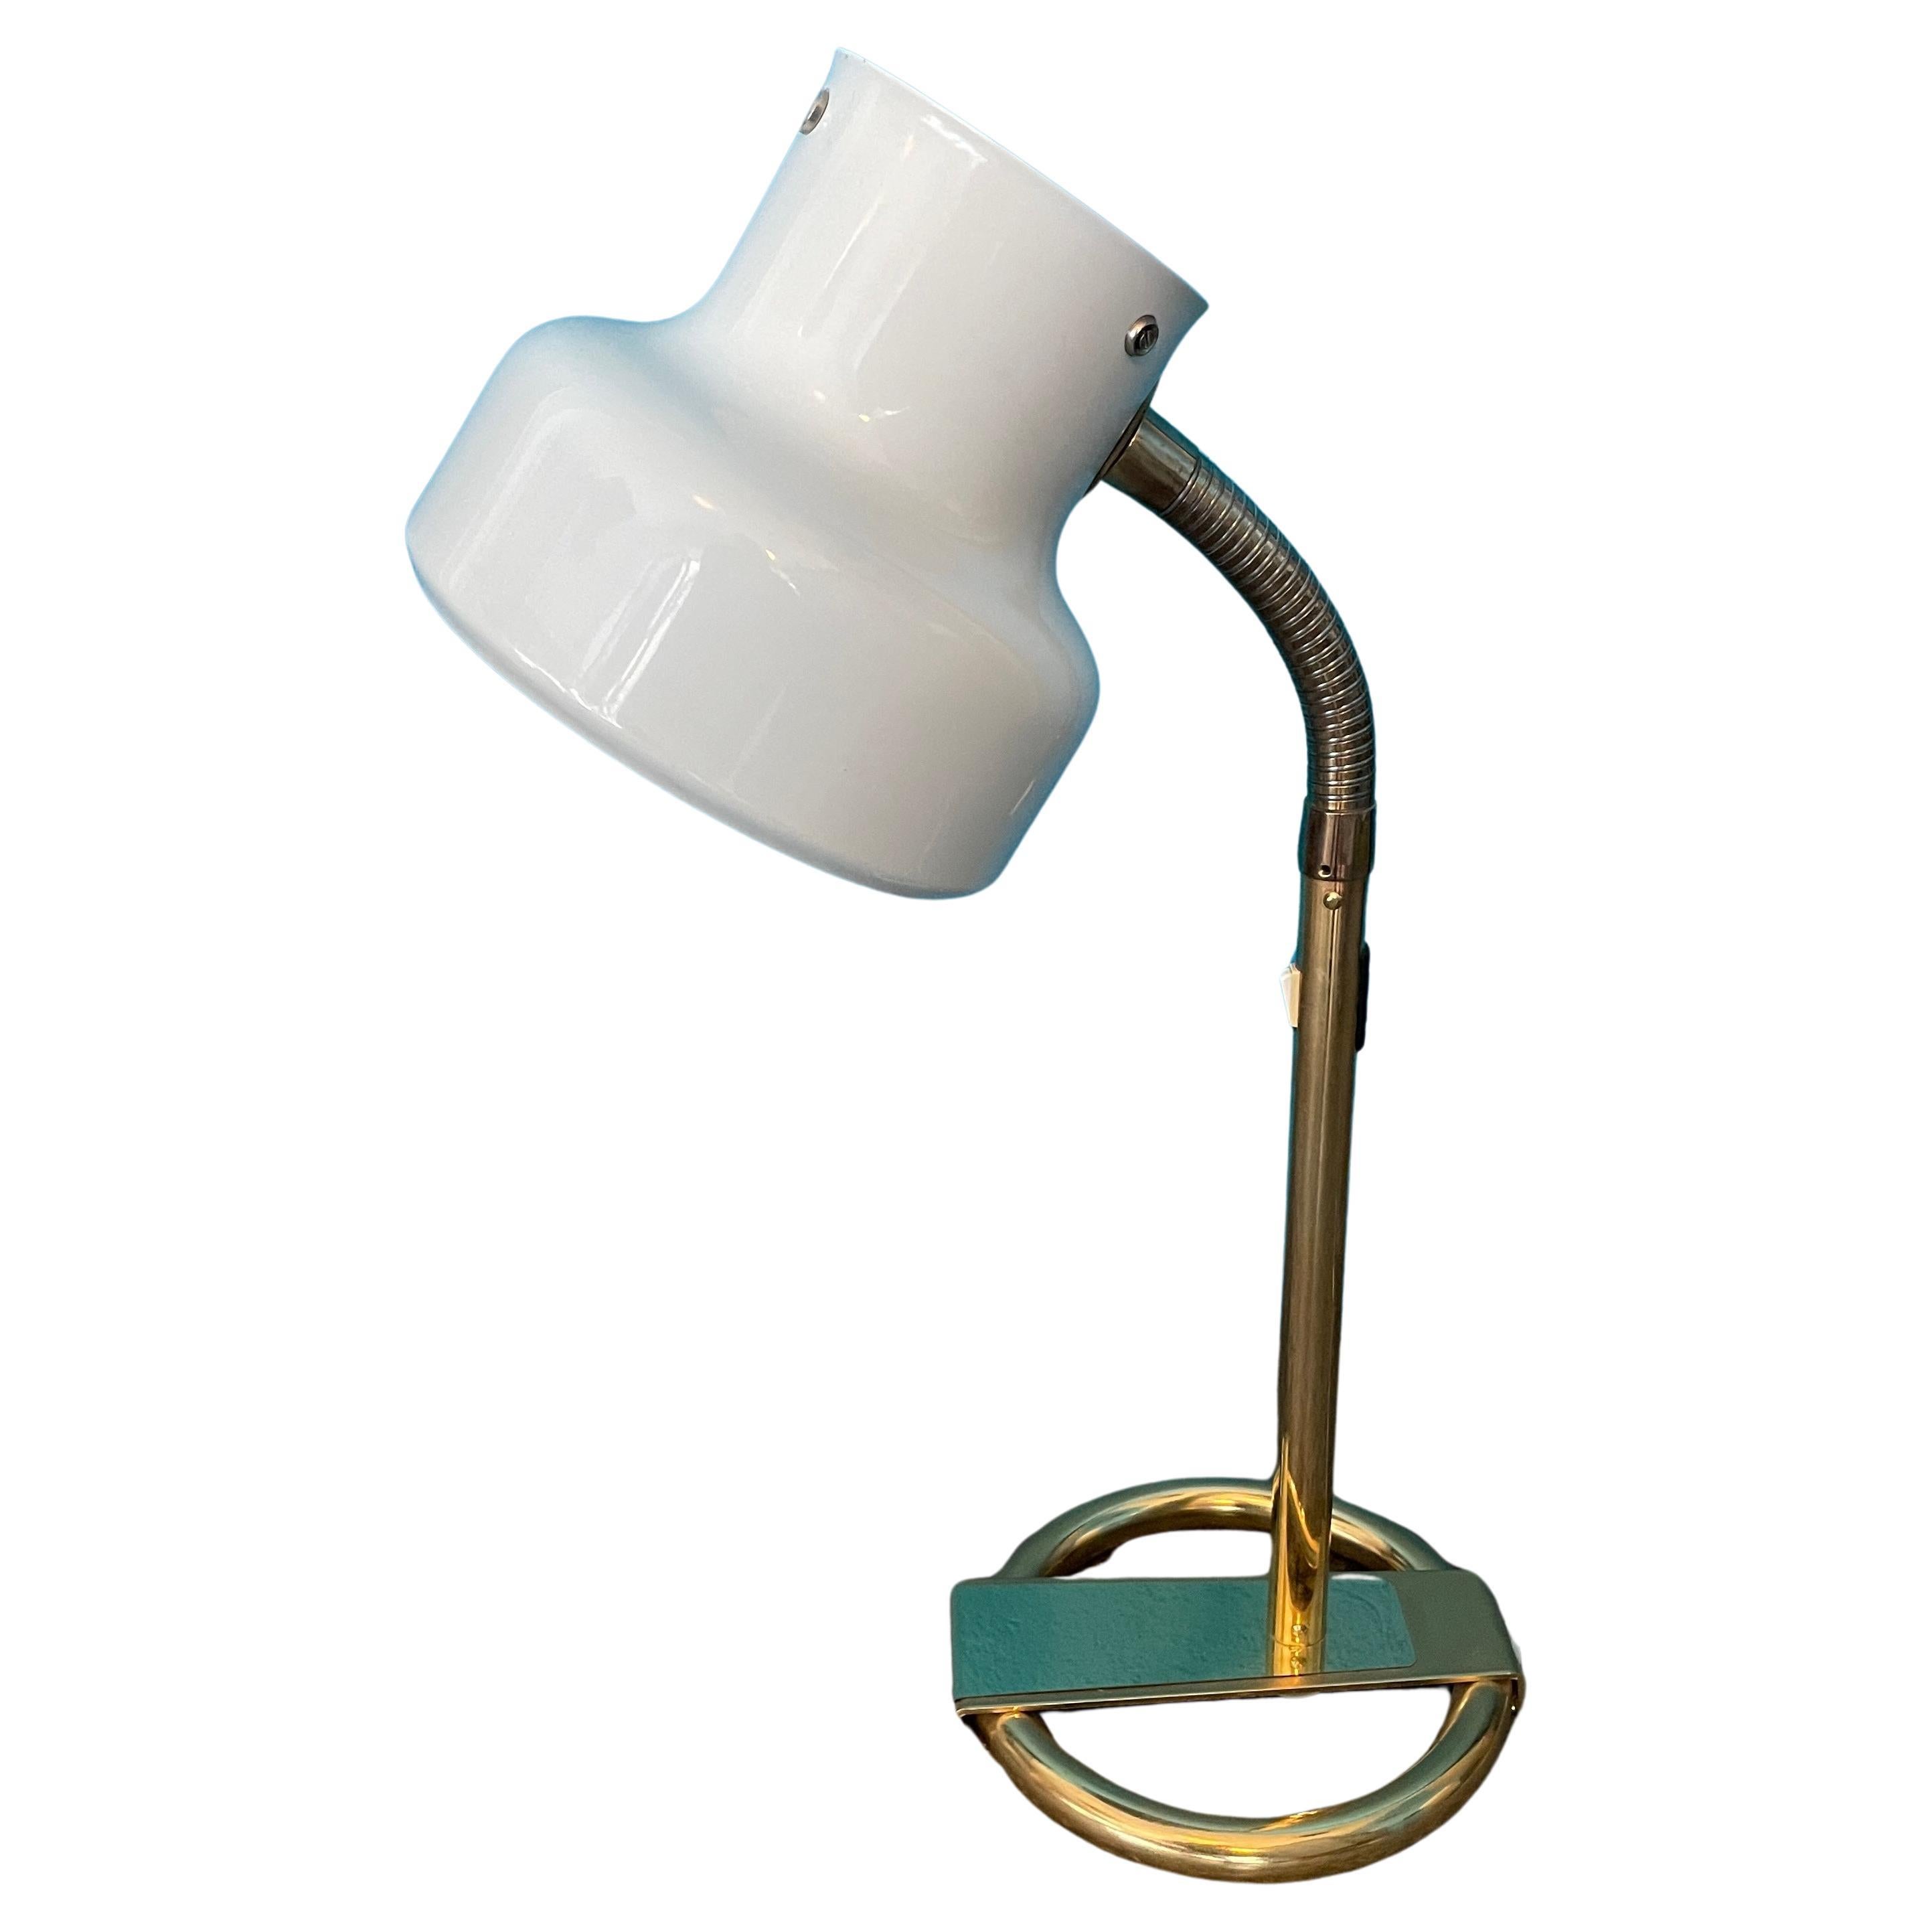 Ateljé Lyktan Bumling Desk Lamp, Designed by Anders Pehrson, Made in Sweden.   For Sale